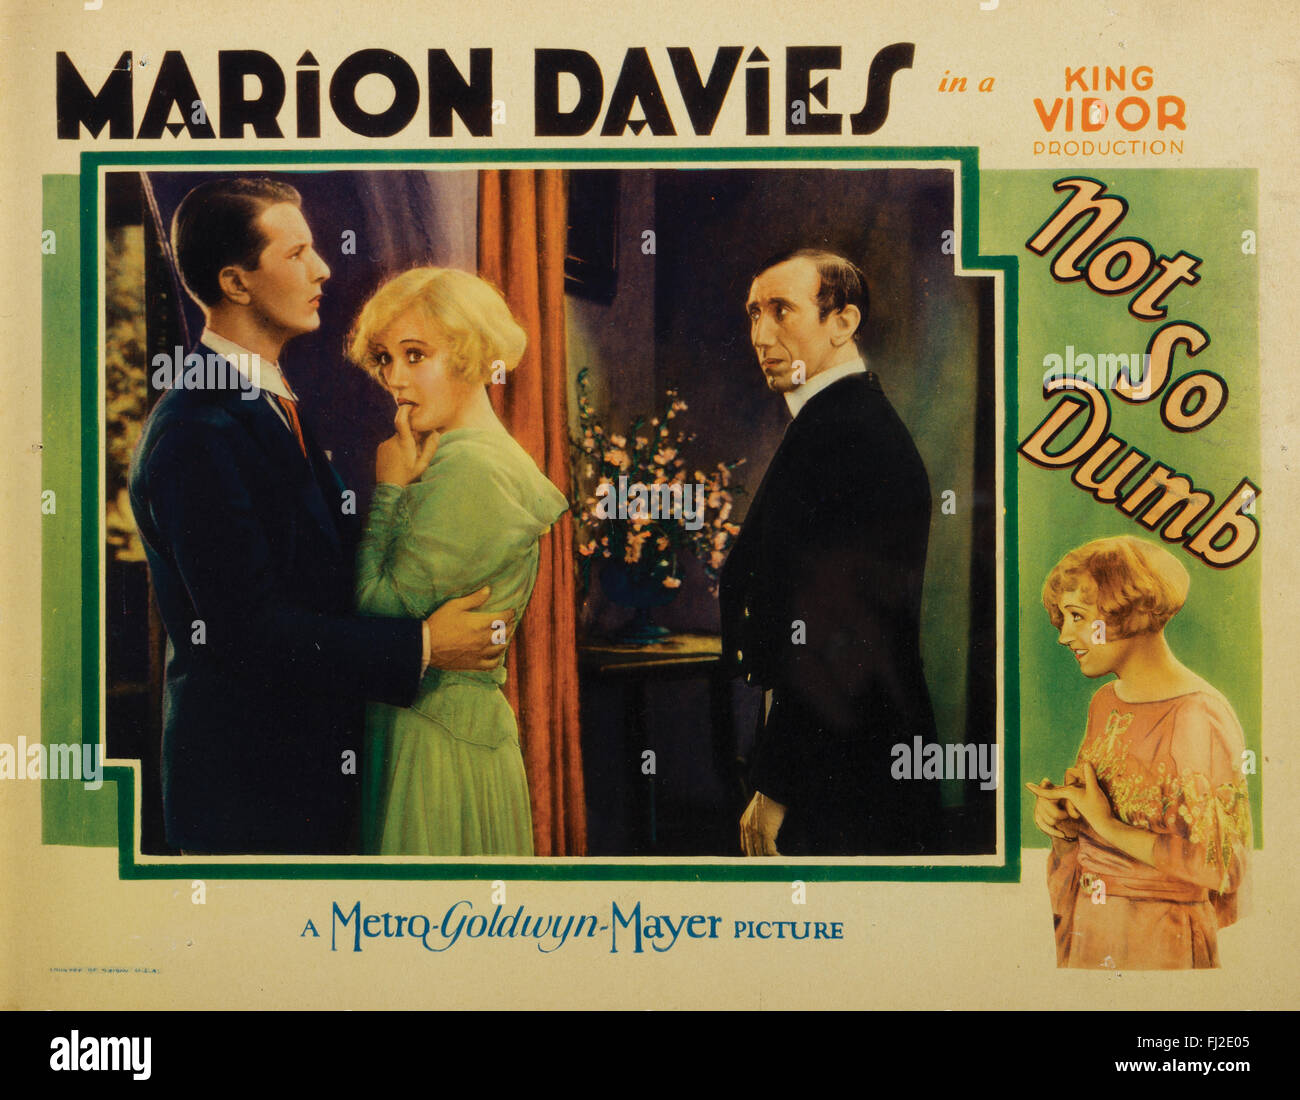 'Not So Dumb', (MGM, 1930), scene lobby card. Starring: Marion Davies, Elliott Nugent, Raymond Hackett, William Holden. Director: King Vidor; Writers: George S. Kaufman and Mark Connelly. Stock Photo